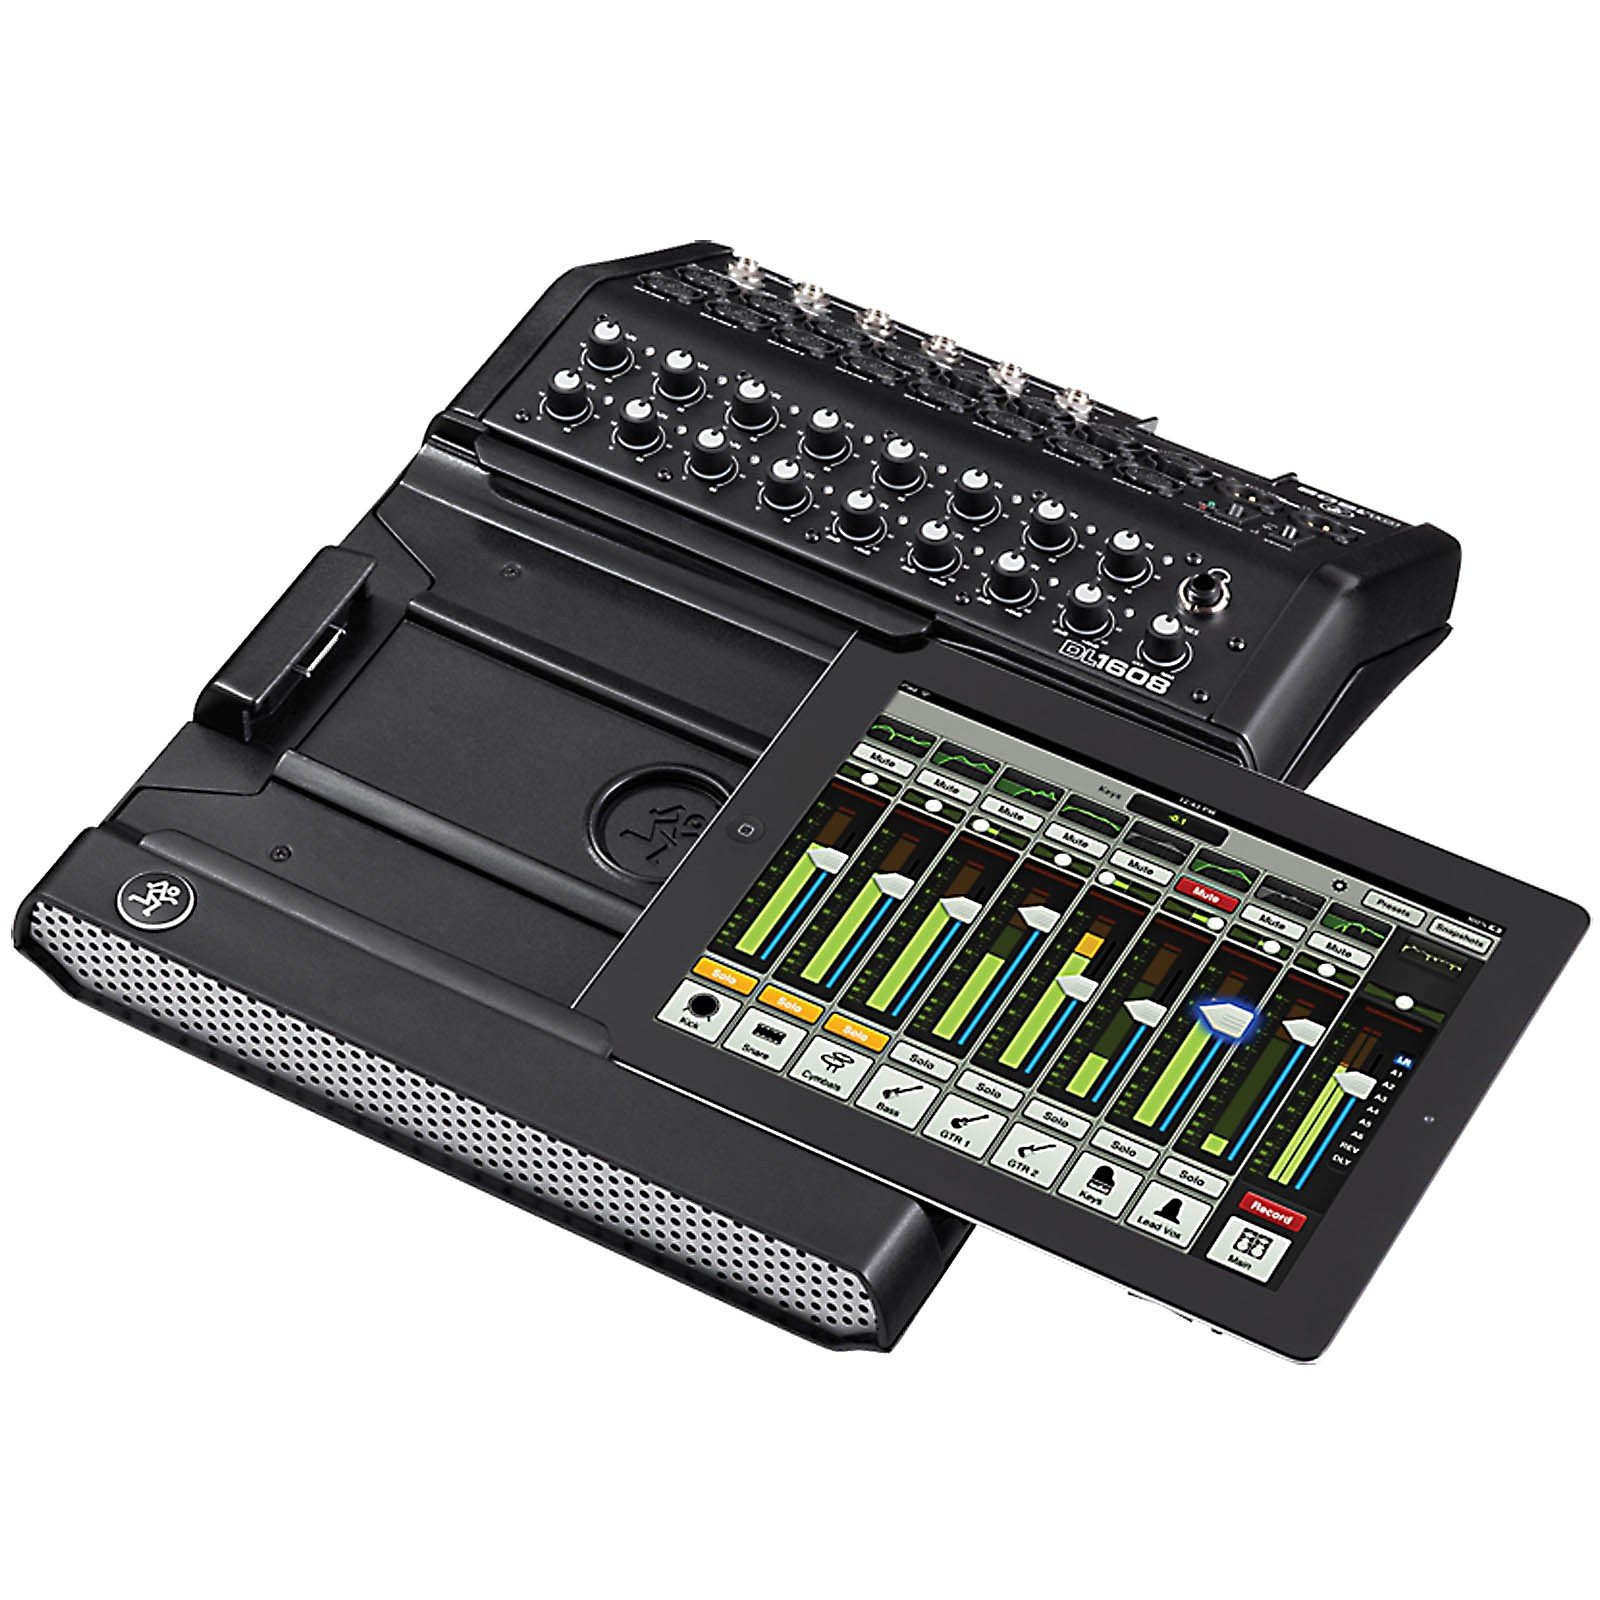 Mackie DL1608 16-Channel Digital Live Sound Mixer with iPad Control ...